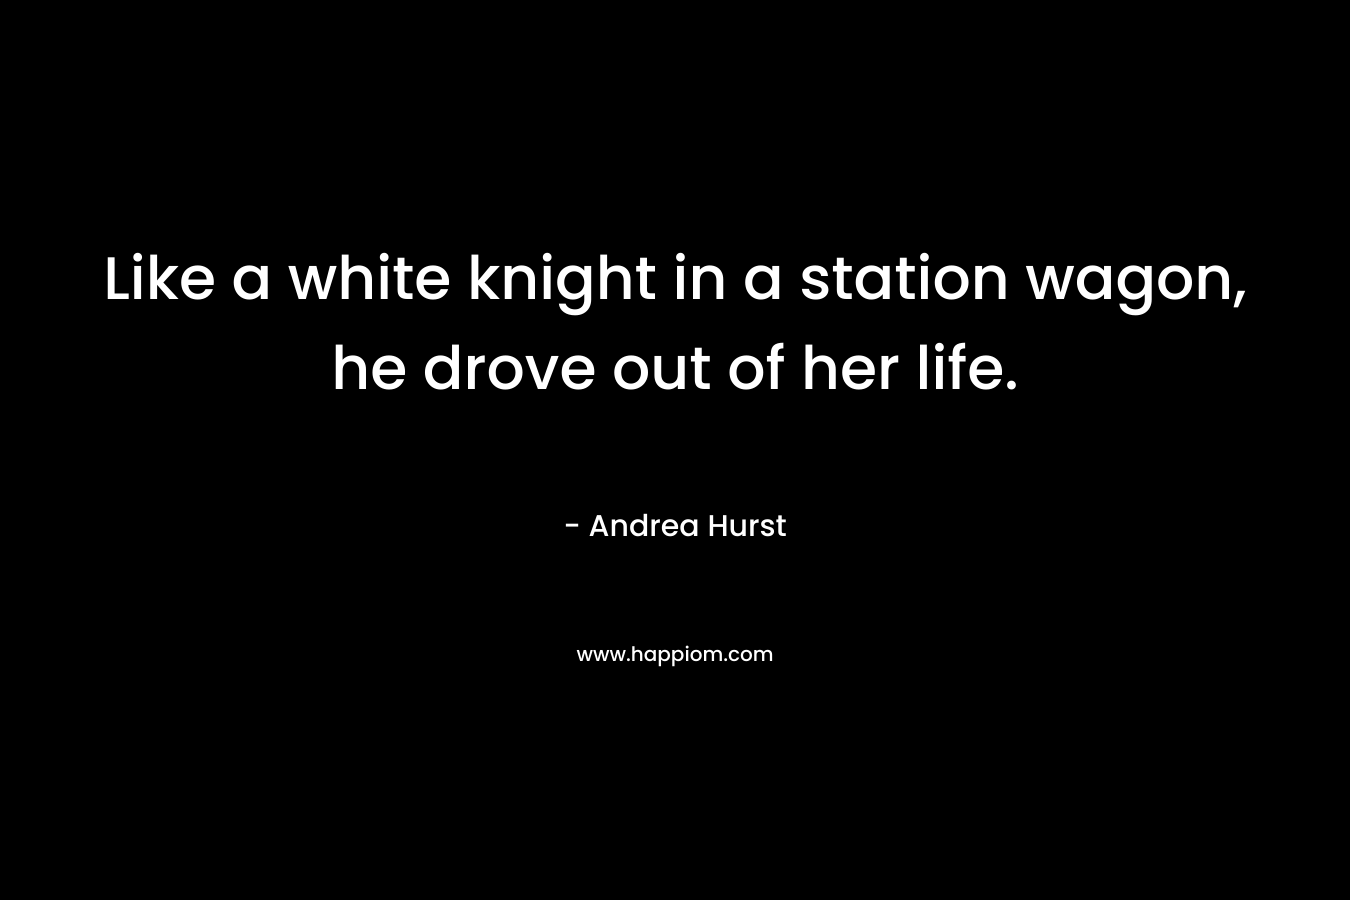 Like a white knight in a station wagon, he drove out of her life.